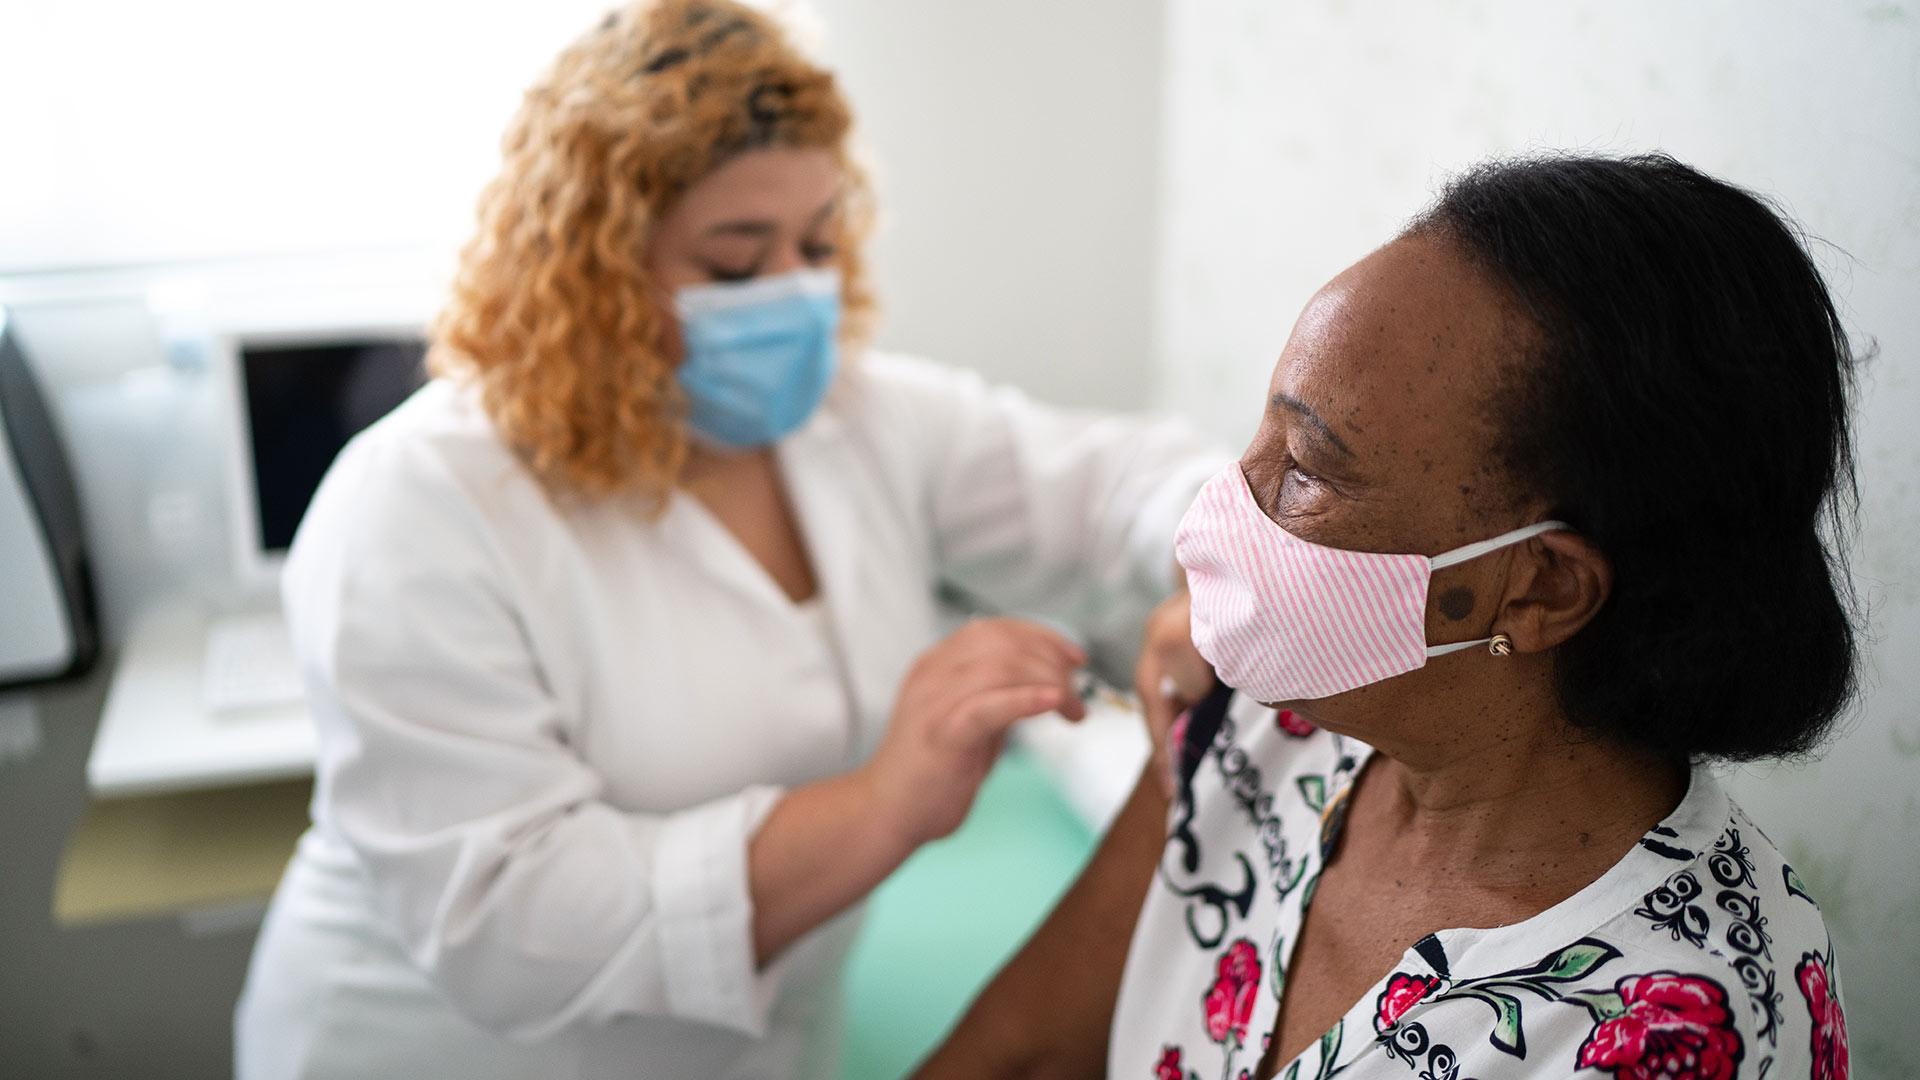 African American older woman getting vaccinated by another woman, both wearing masks to protect from COVID-19